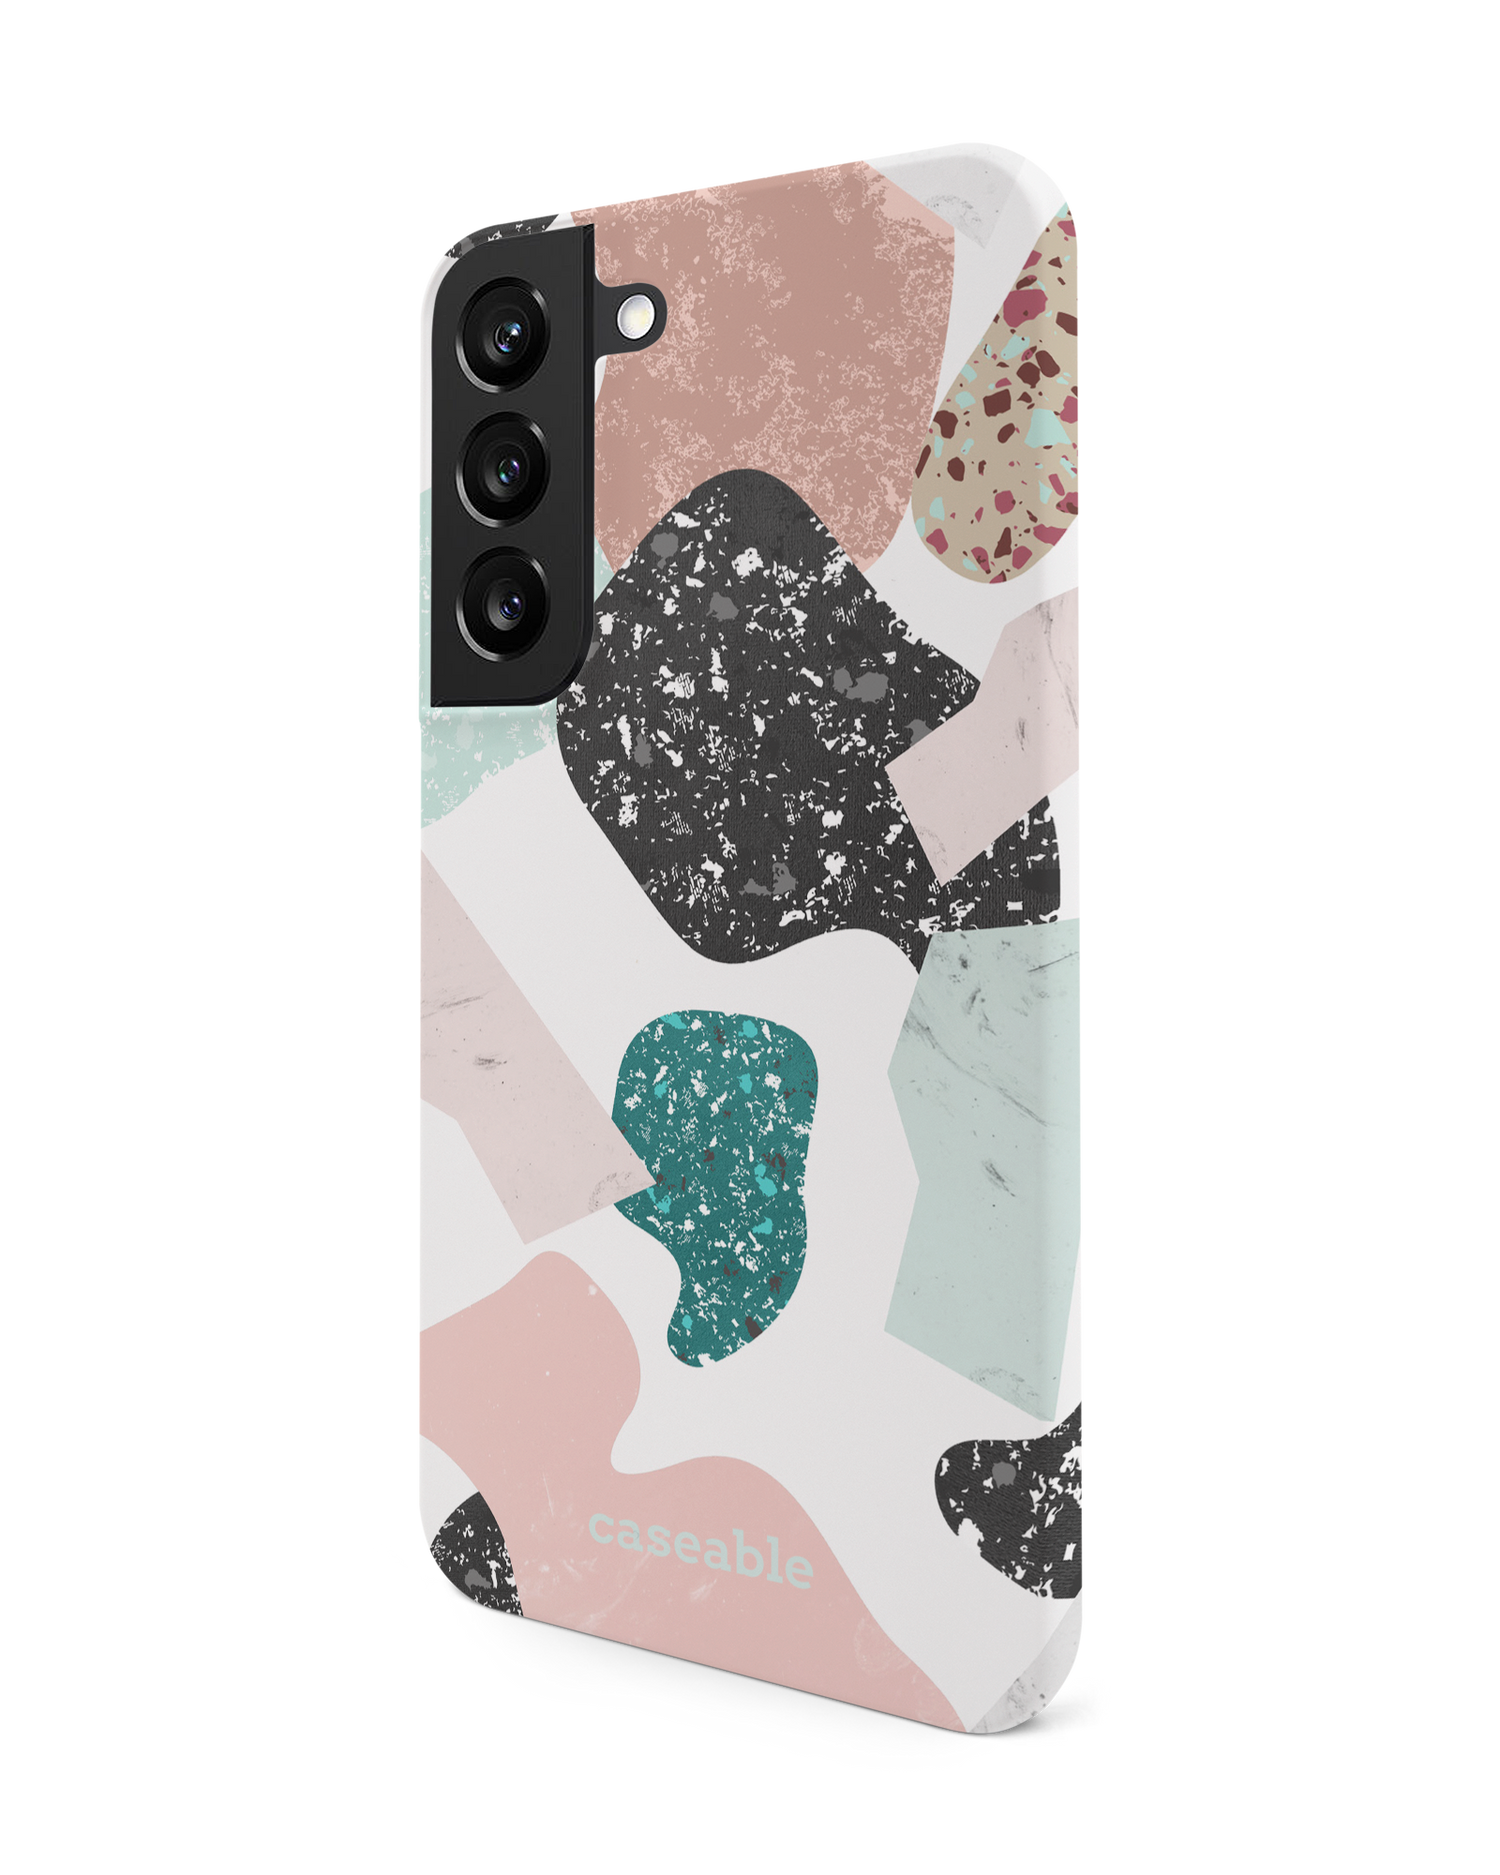 Scattered Shapes Hard Shell Phone Case Samsung Galaxy S22 5G: View from the right side